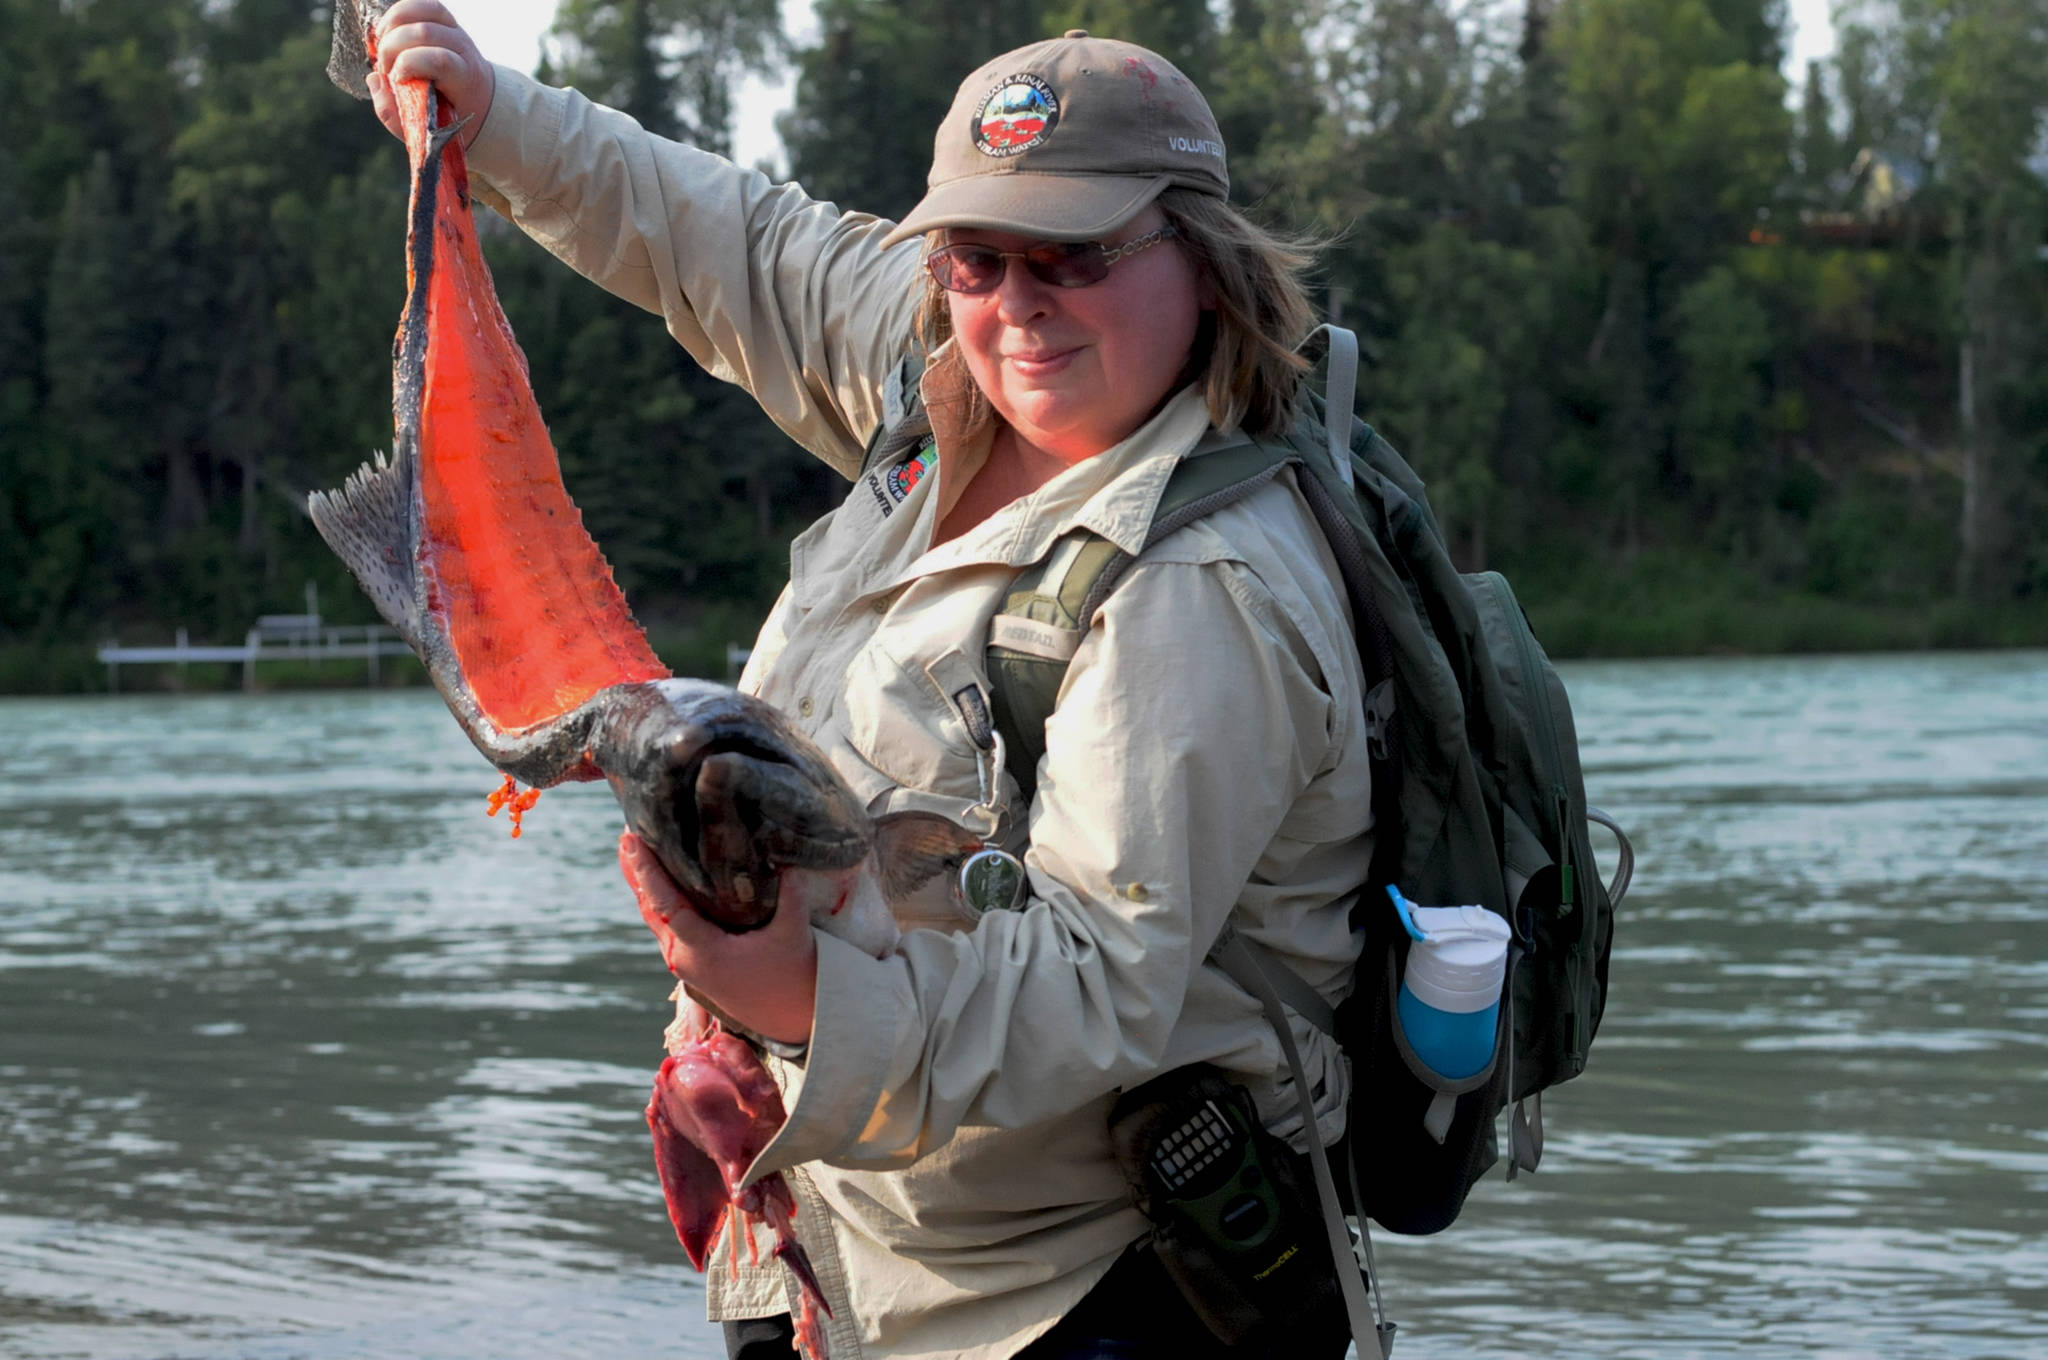 Kathy Heindle, a Kenai Peninsula Stream Watch volunteer, holds up a filleted king salmon carcass before demonstrating how to properly “stop, chop and throw” the carcass into the Kenai River in Centennial Park on Thursday, July 13, 2017 in Soldotna, Alaska. Heindle, who has been volunteering with Stream Watch since 2011, received a “Kingmaker” award from the Kachemak Heritage Land Trust for her work protecting the Kenai River watershed. (Photo by Elizabeth Earl/Peninsula Clarion)